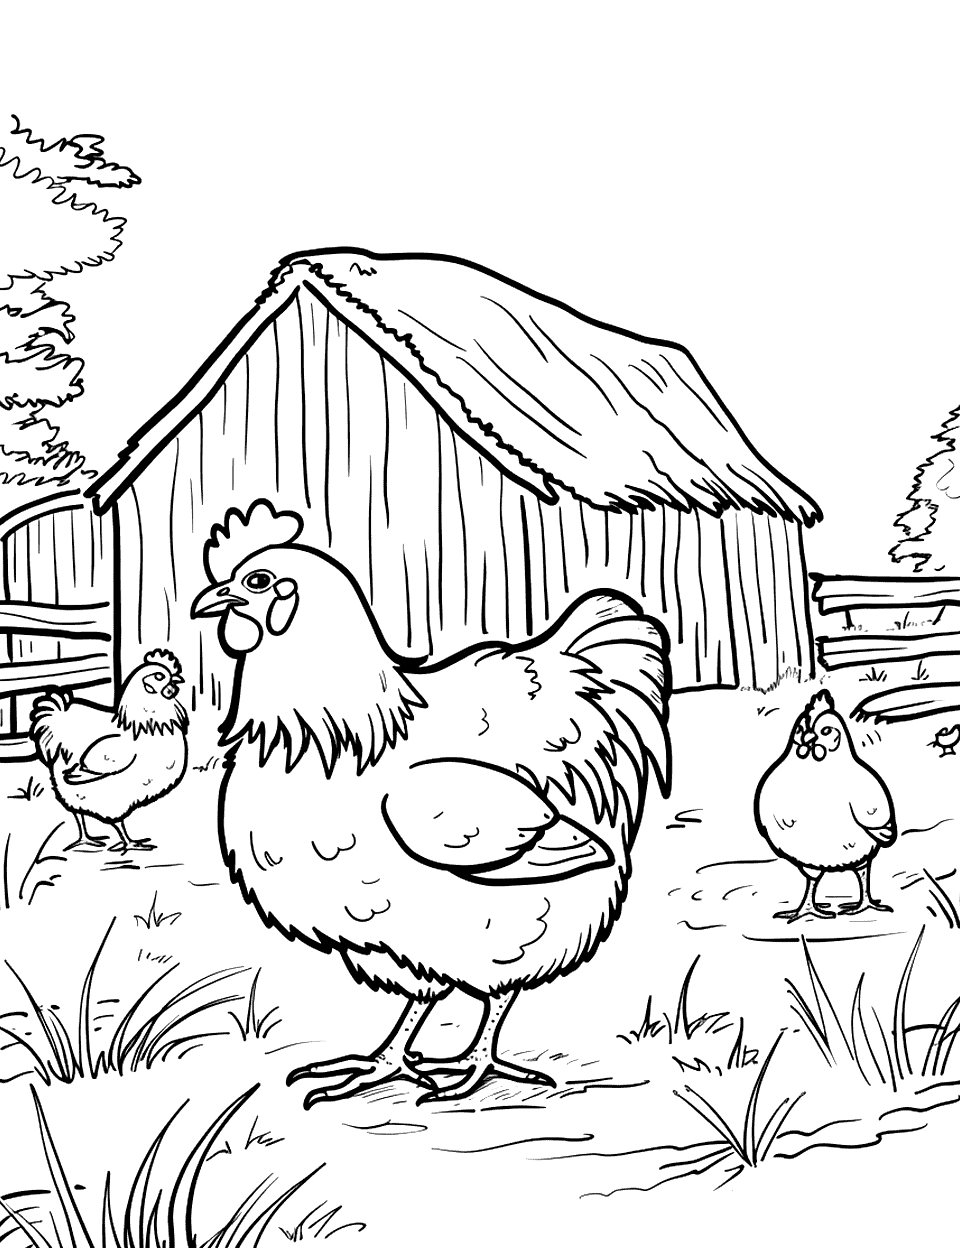 Farm Scene with Chickens Chicken Coloring Page - A lively farm scene focusing on chickens roaming freely, with a barn in the background.